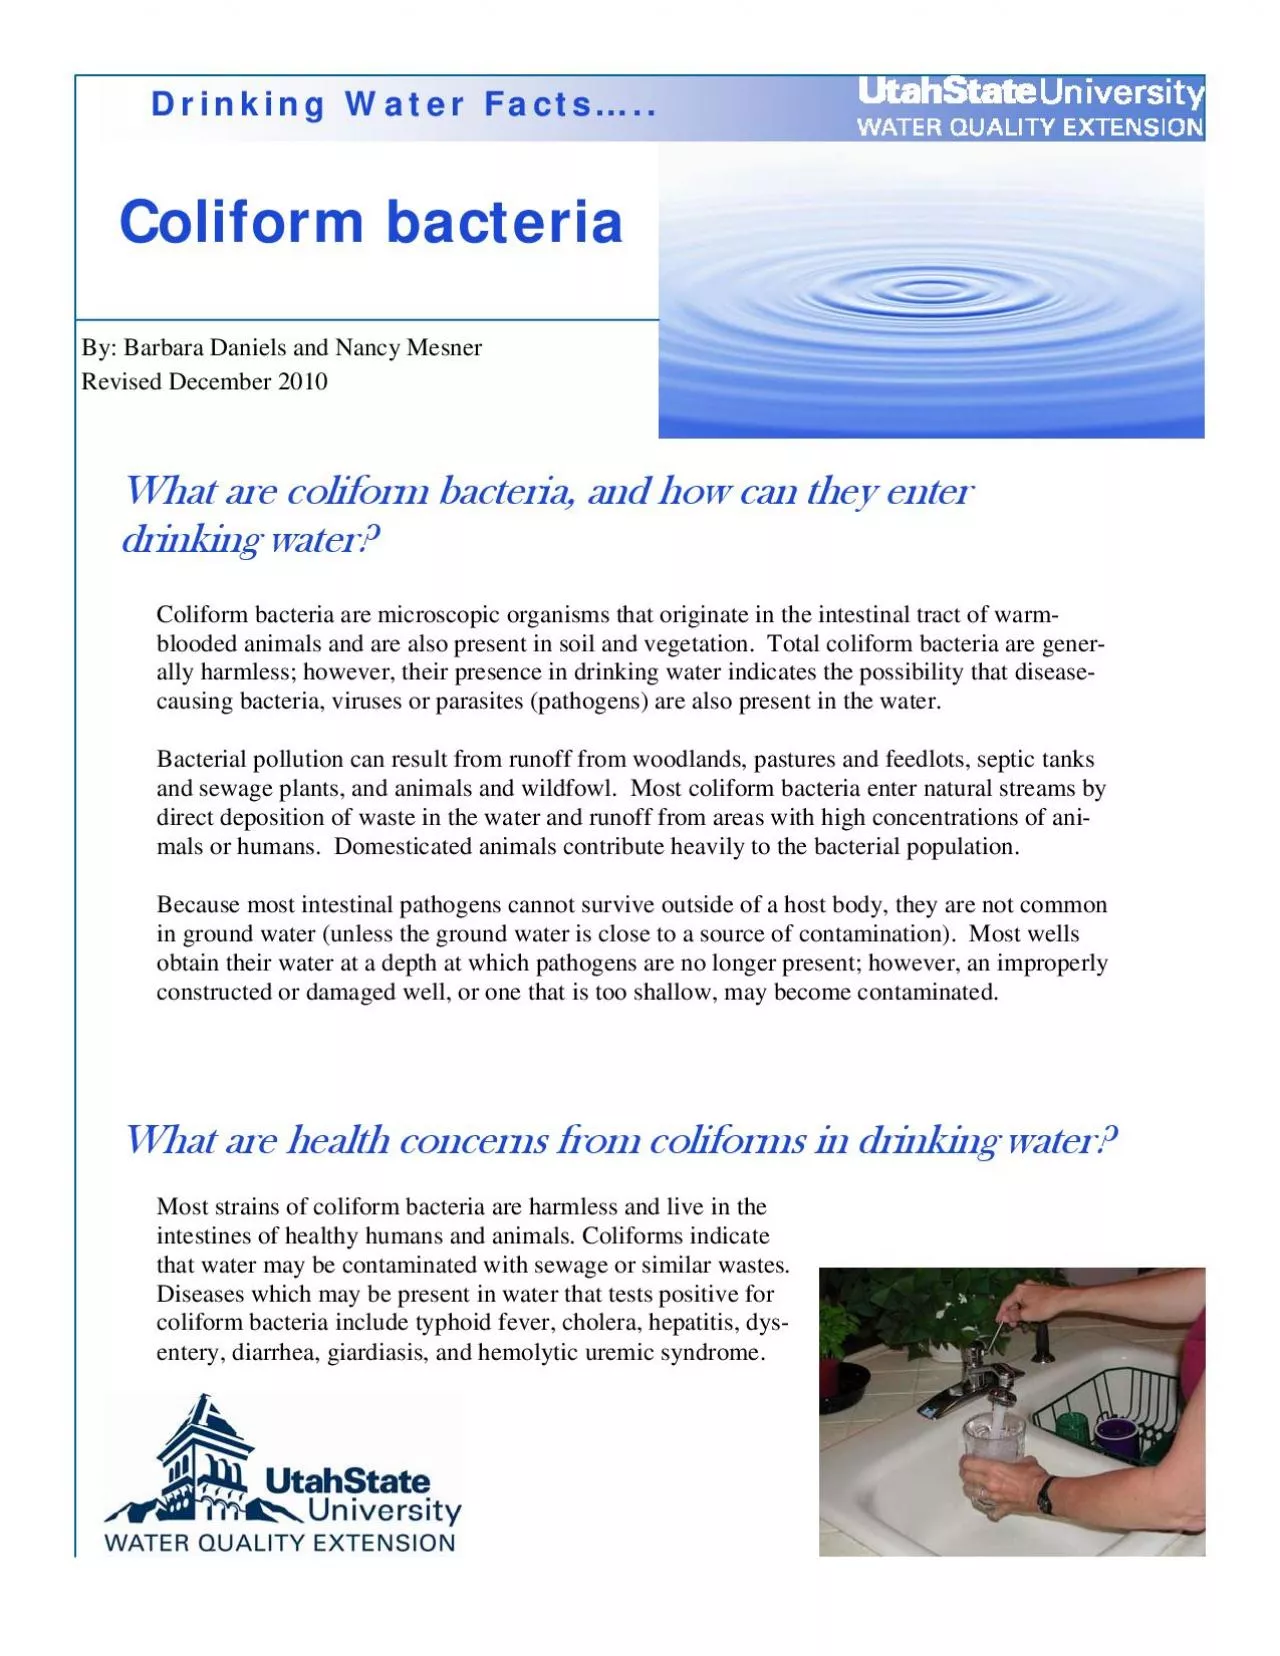 Revised December 2010 Coliform bacteria are microscopic organisms that